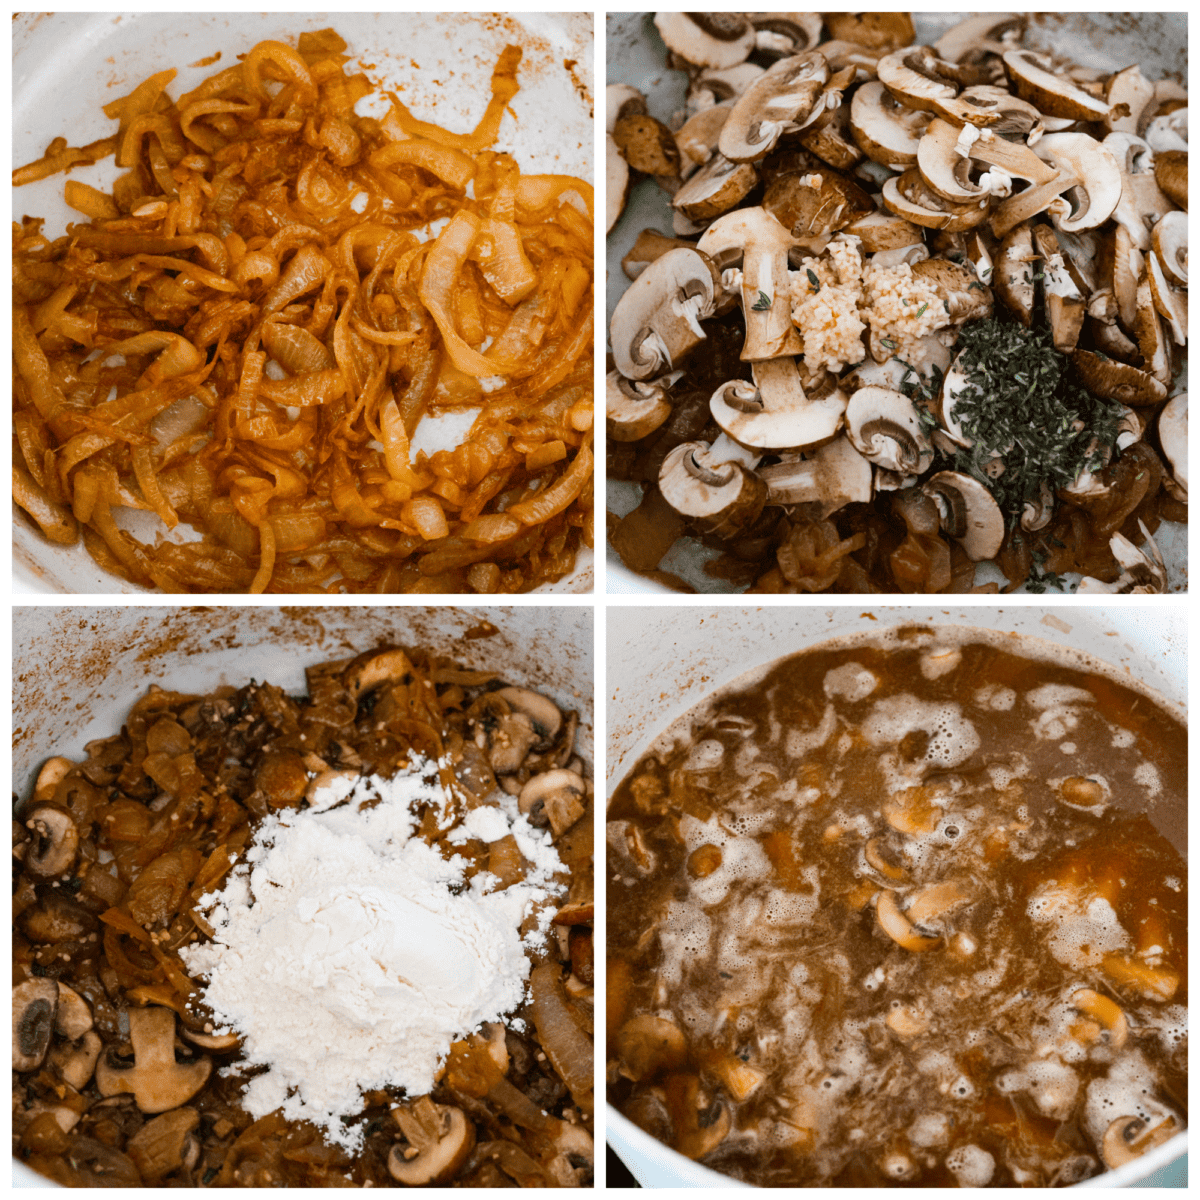 4-photo collage of the onions and mushrooms being cooked together.